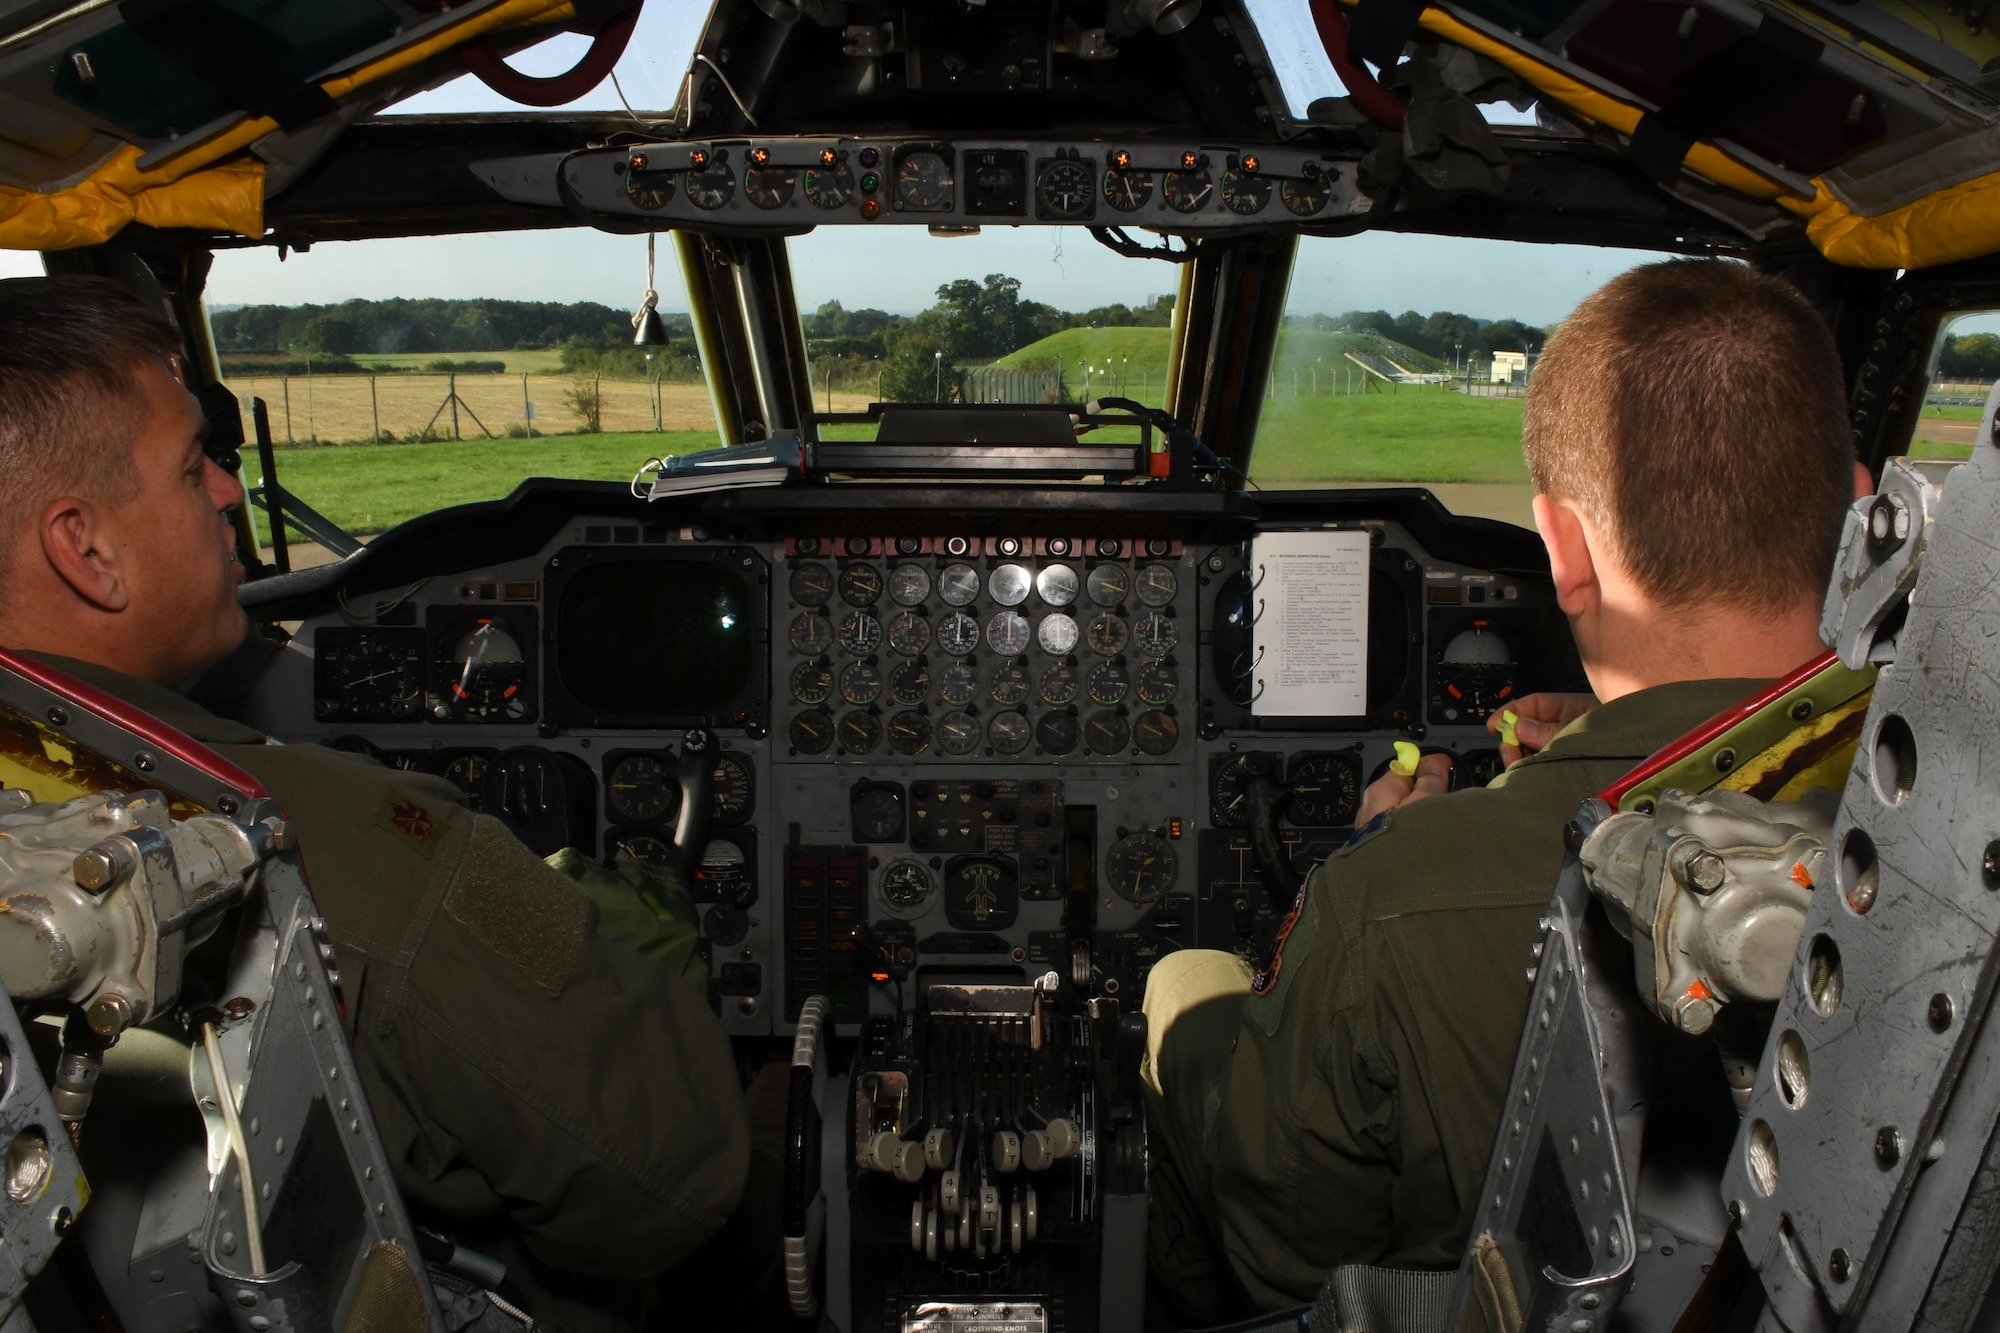 Pilots from the 343rd Bomb Squadron run through their checks in the cockpit of a B-52 Stratofortress at Royal Air Force Fairford, United Kingdom, Sep. 1, 2017.